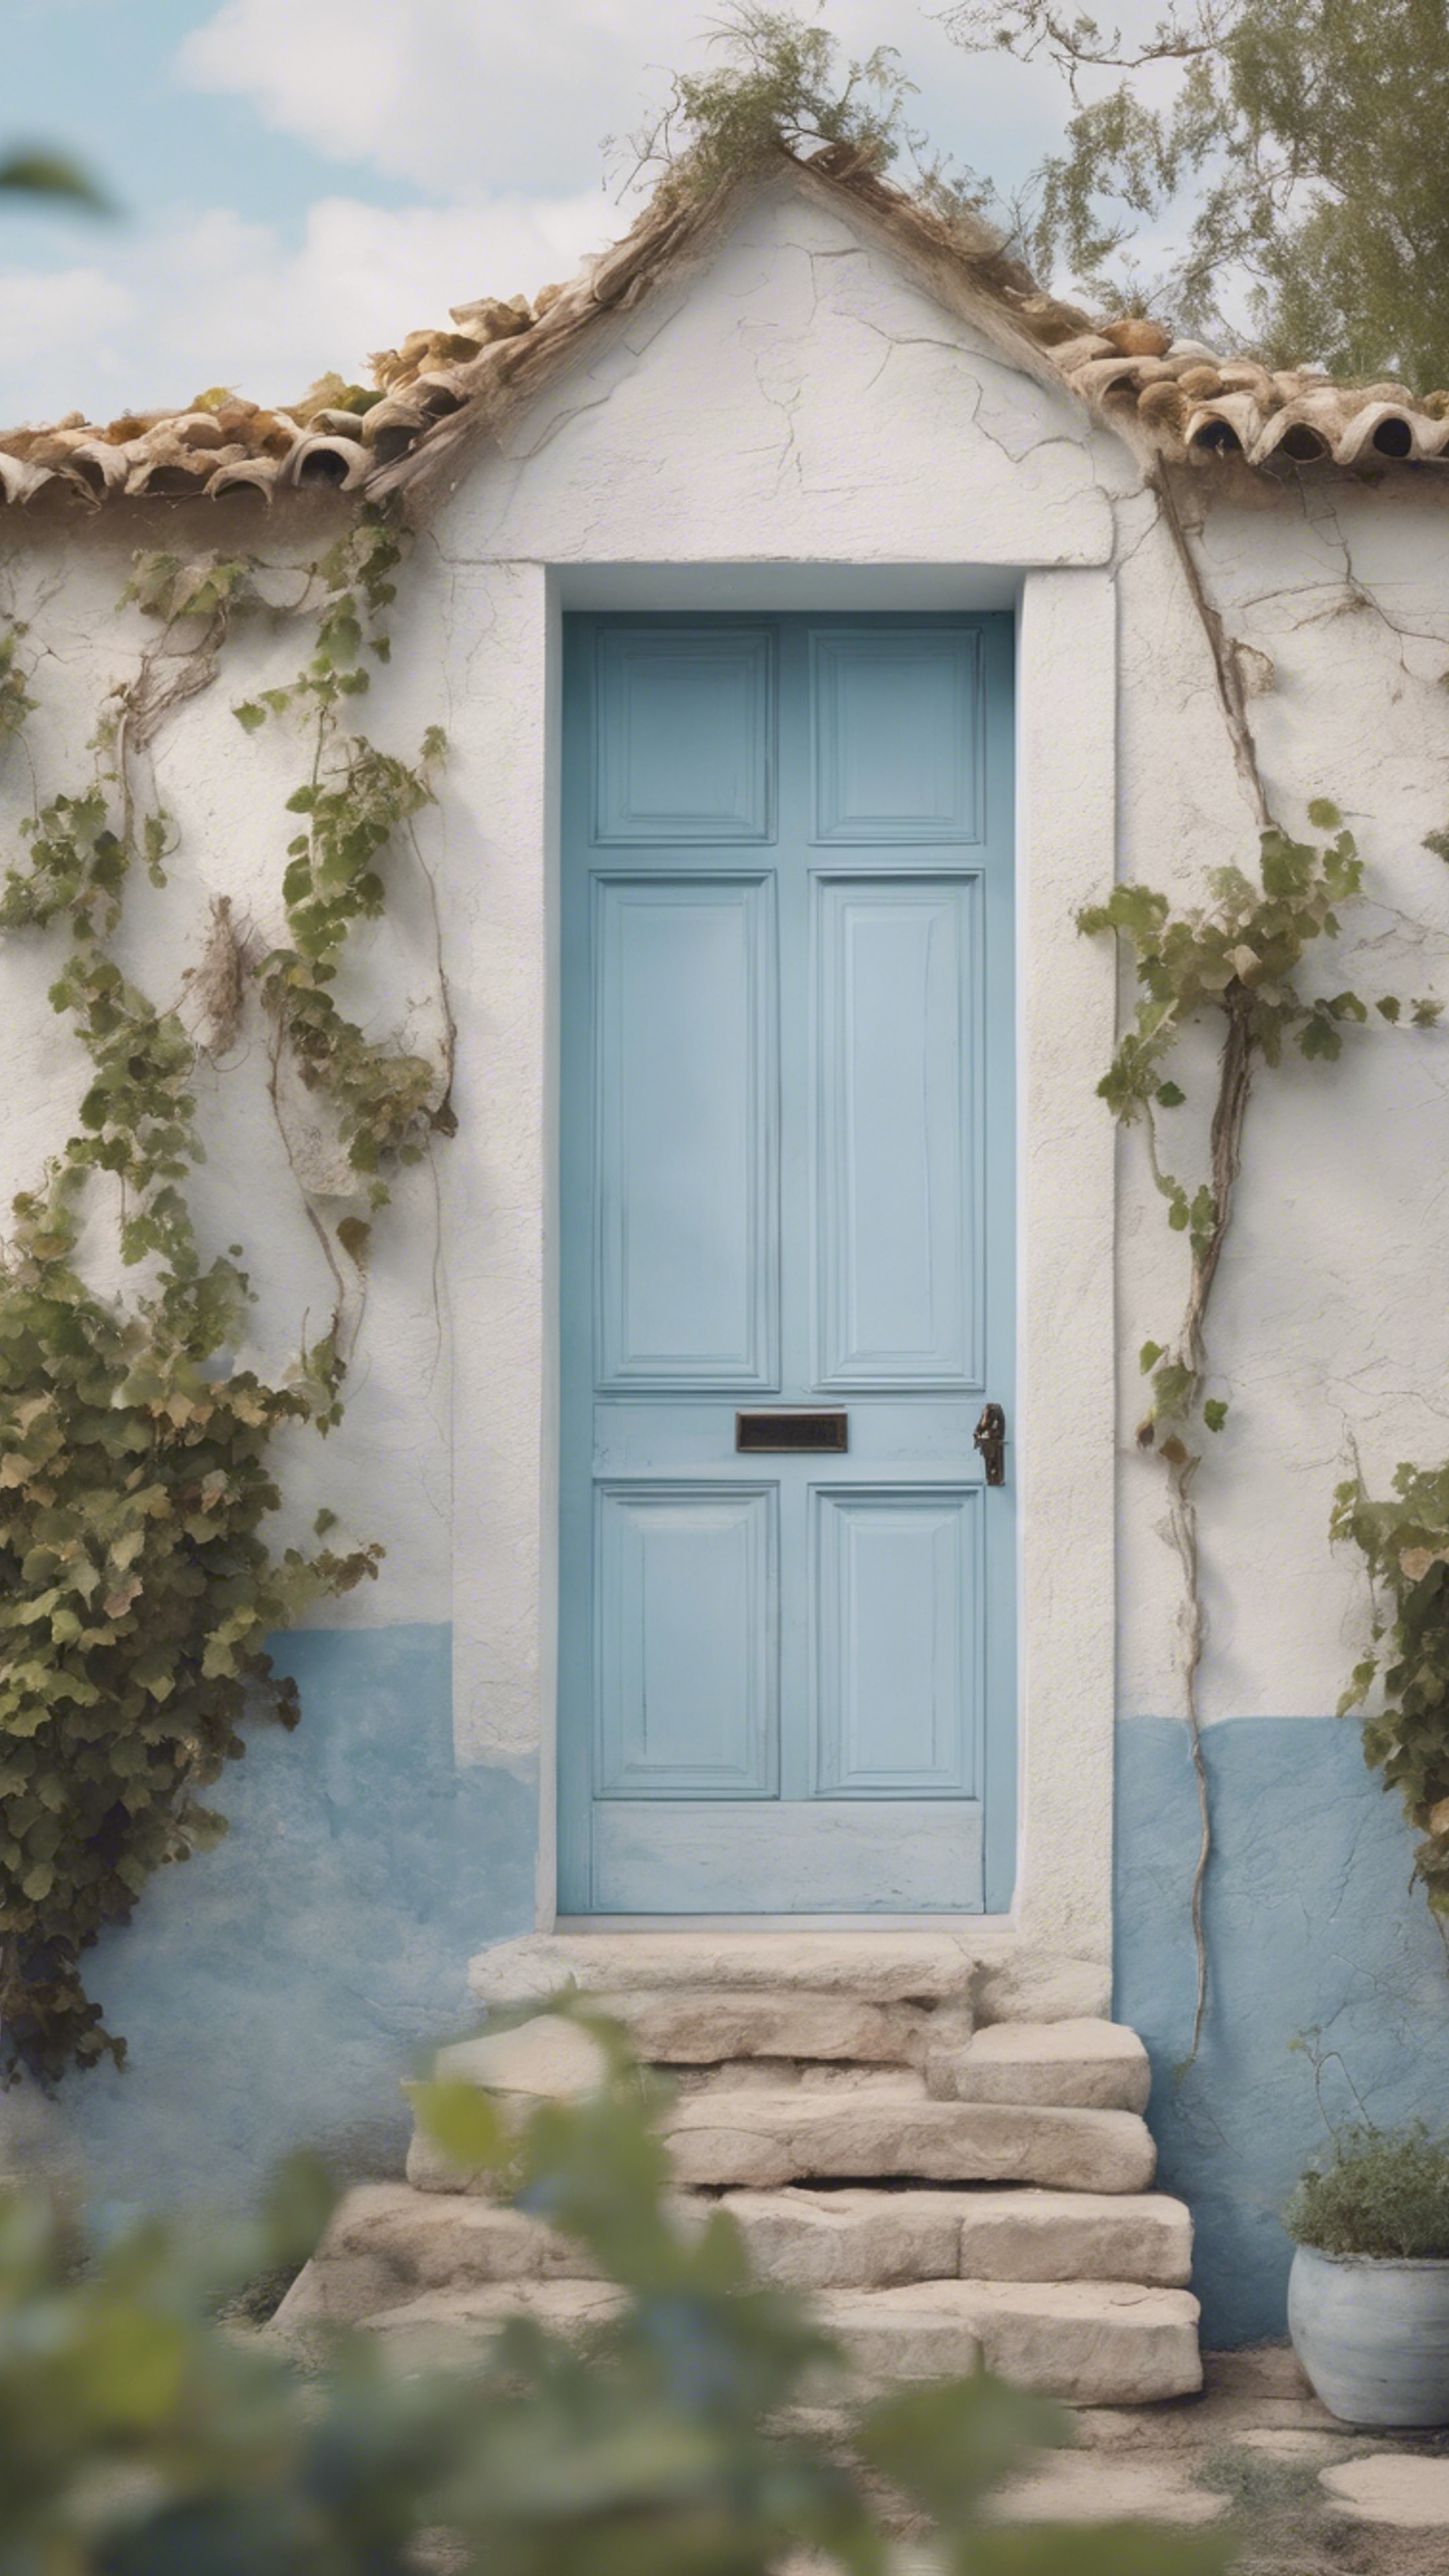 A pastel blue painted door on a rustic white house, a vineyard in the background. Papel de parede[5cba61123f91494ab86f]